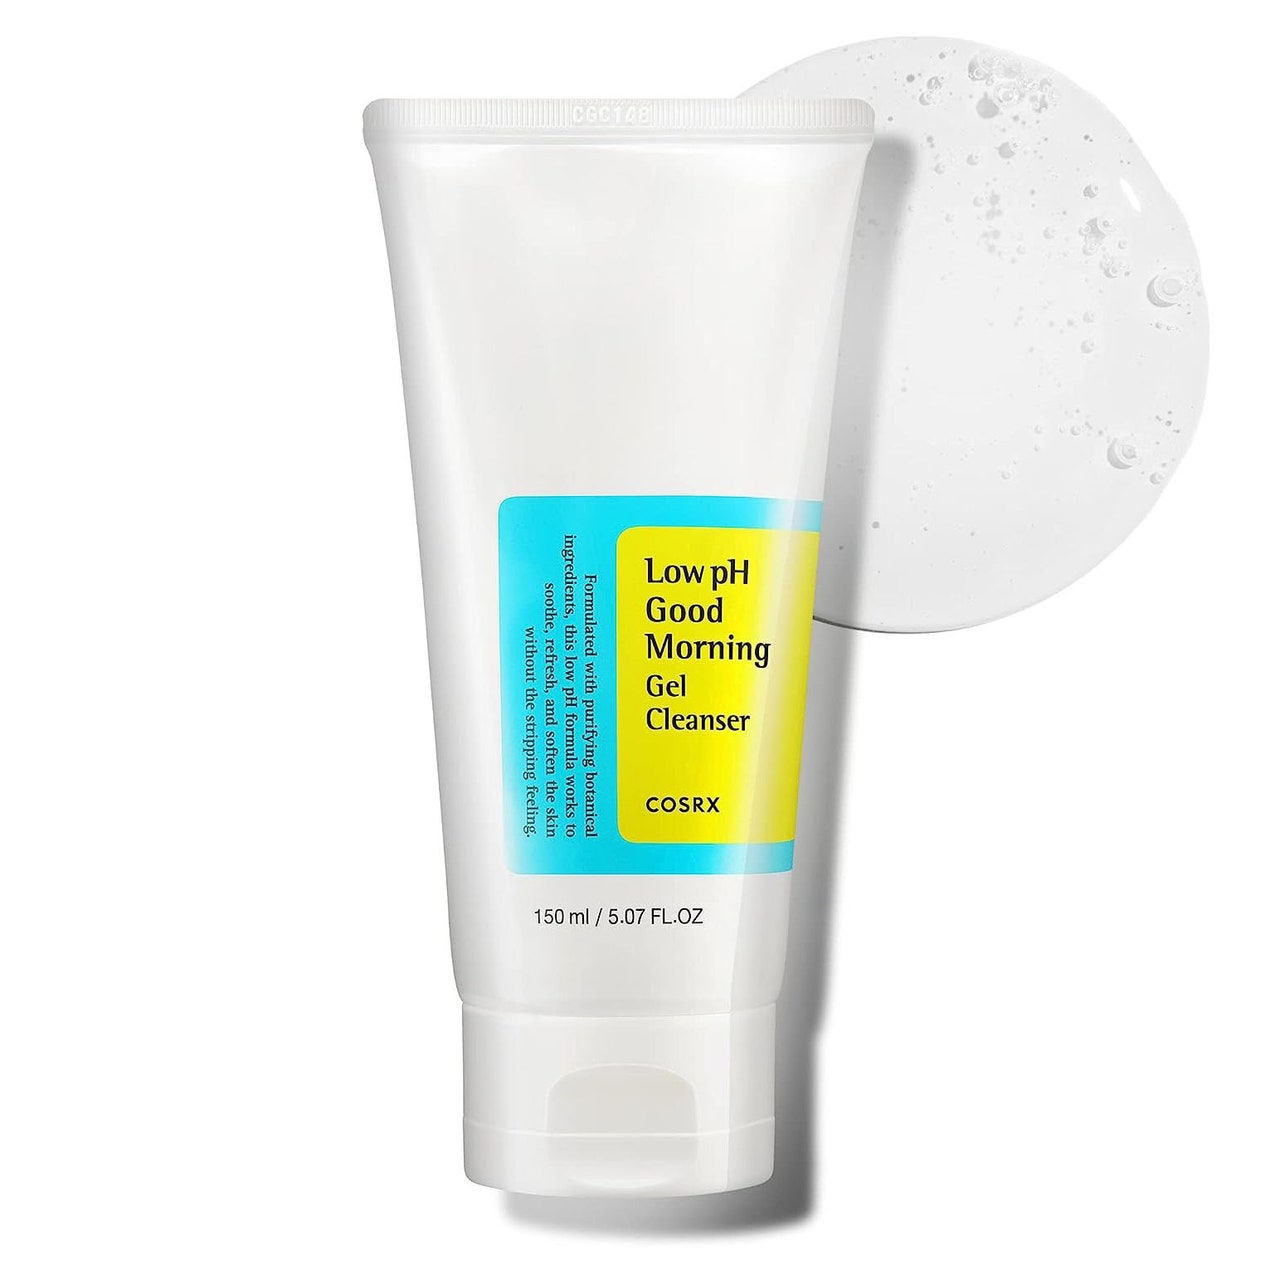 Cosrx Low pH Good Morning Gel Cleanser white squeeze bottle with blue and yellow label and swatch on white background